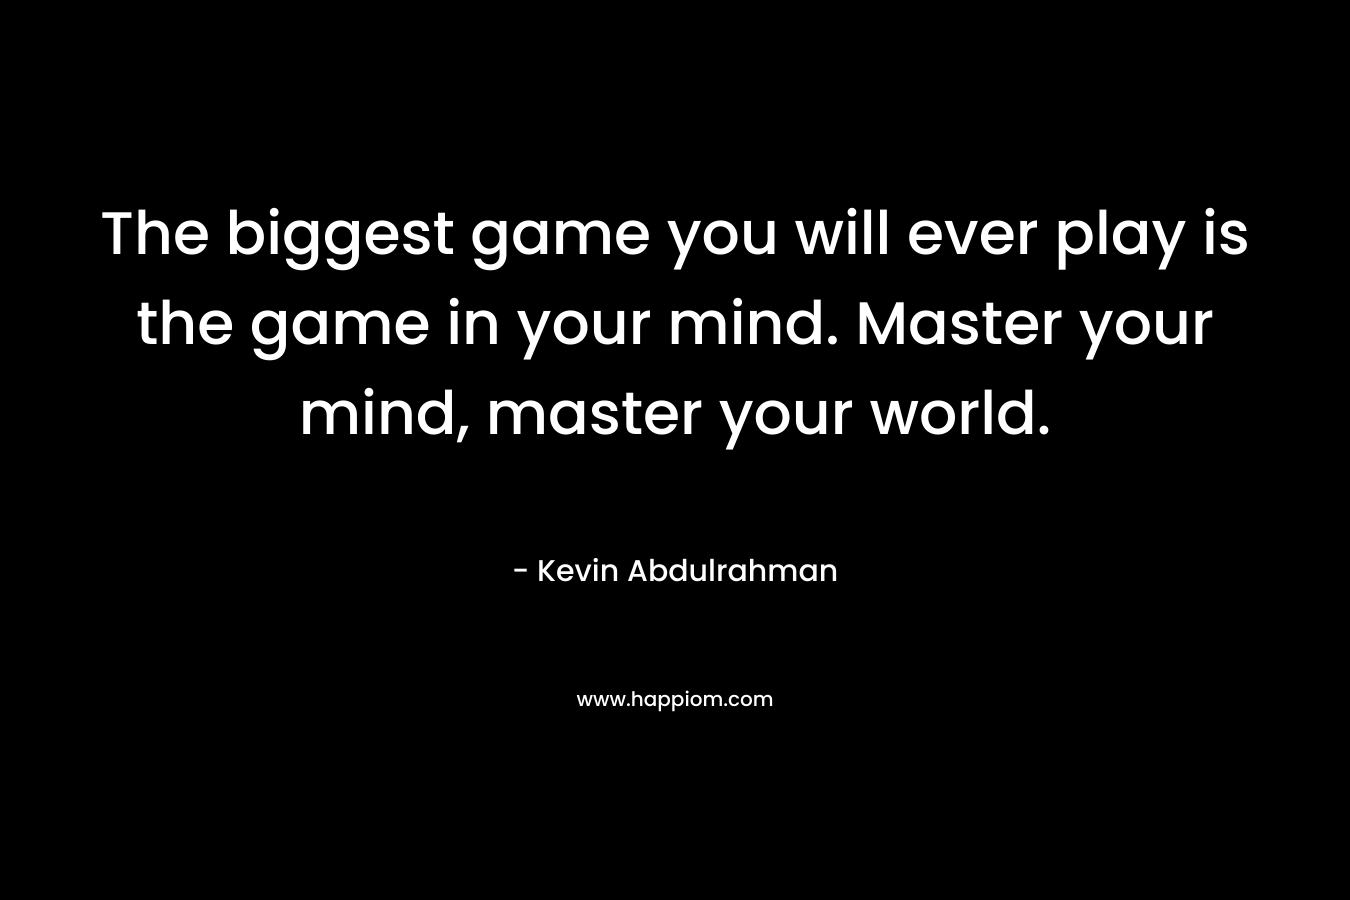 The biggest game you will ever play is the game in your mind. Master your mind, master your world.